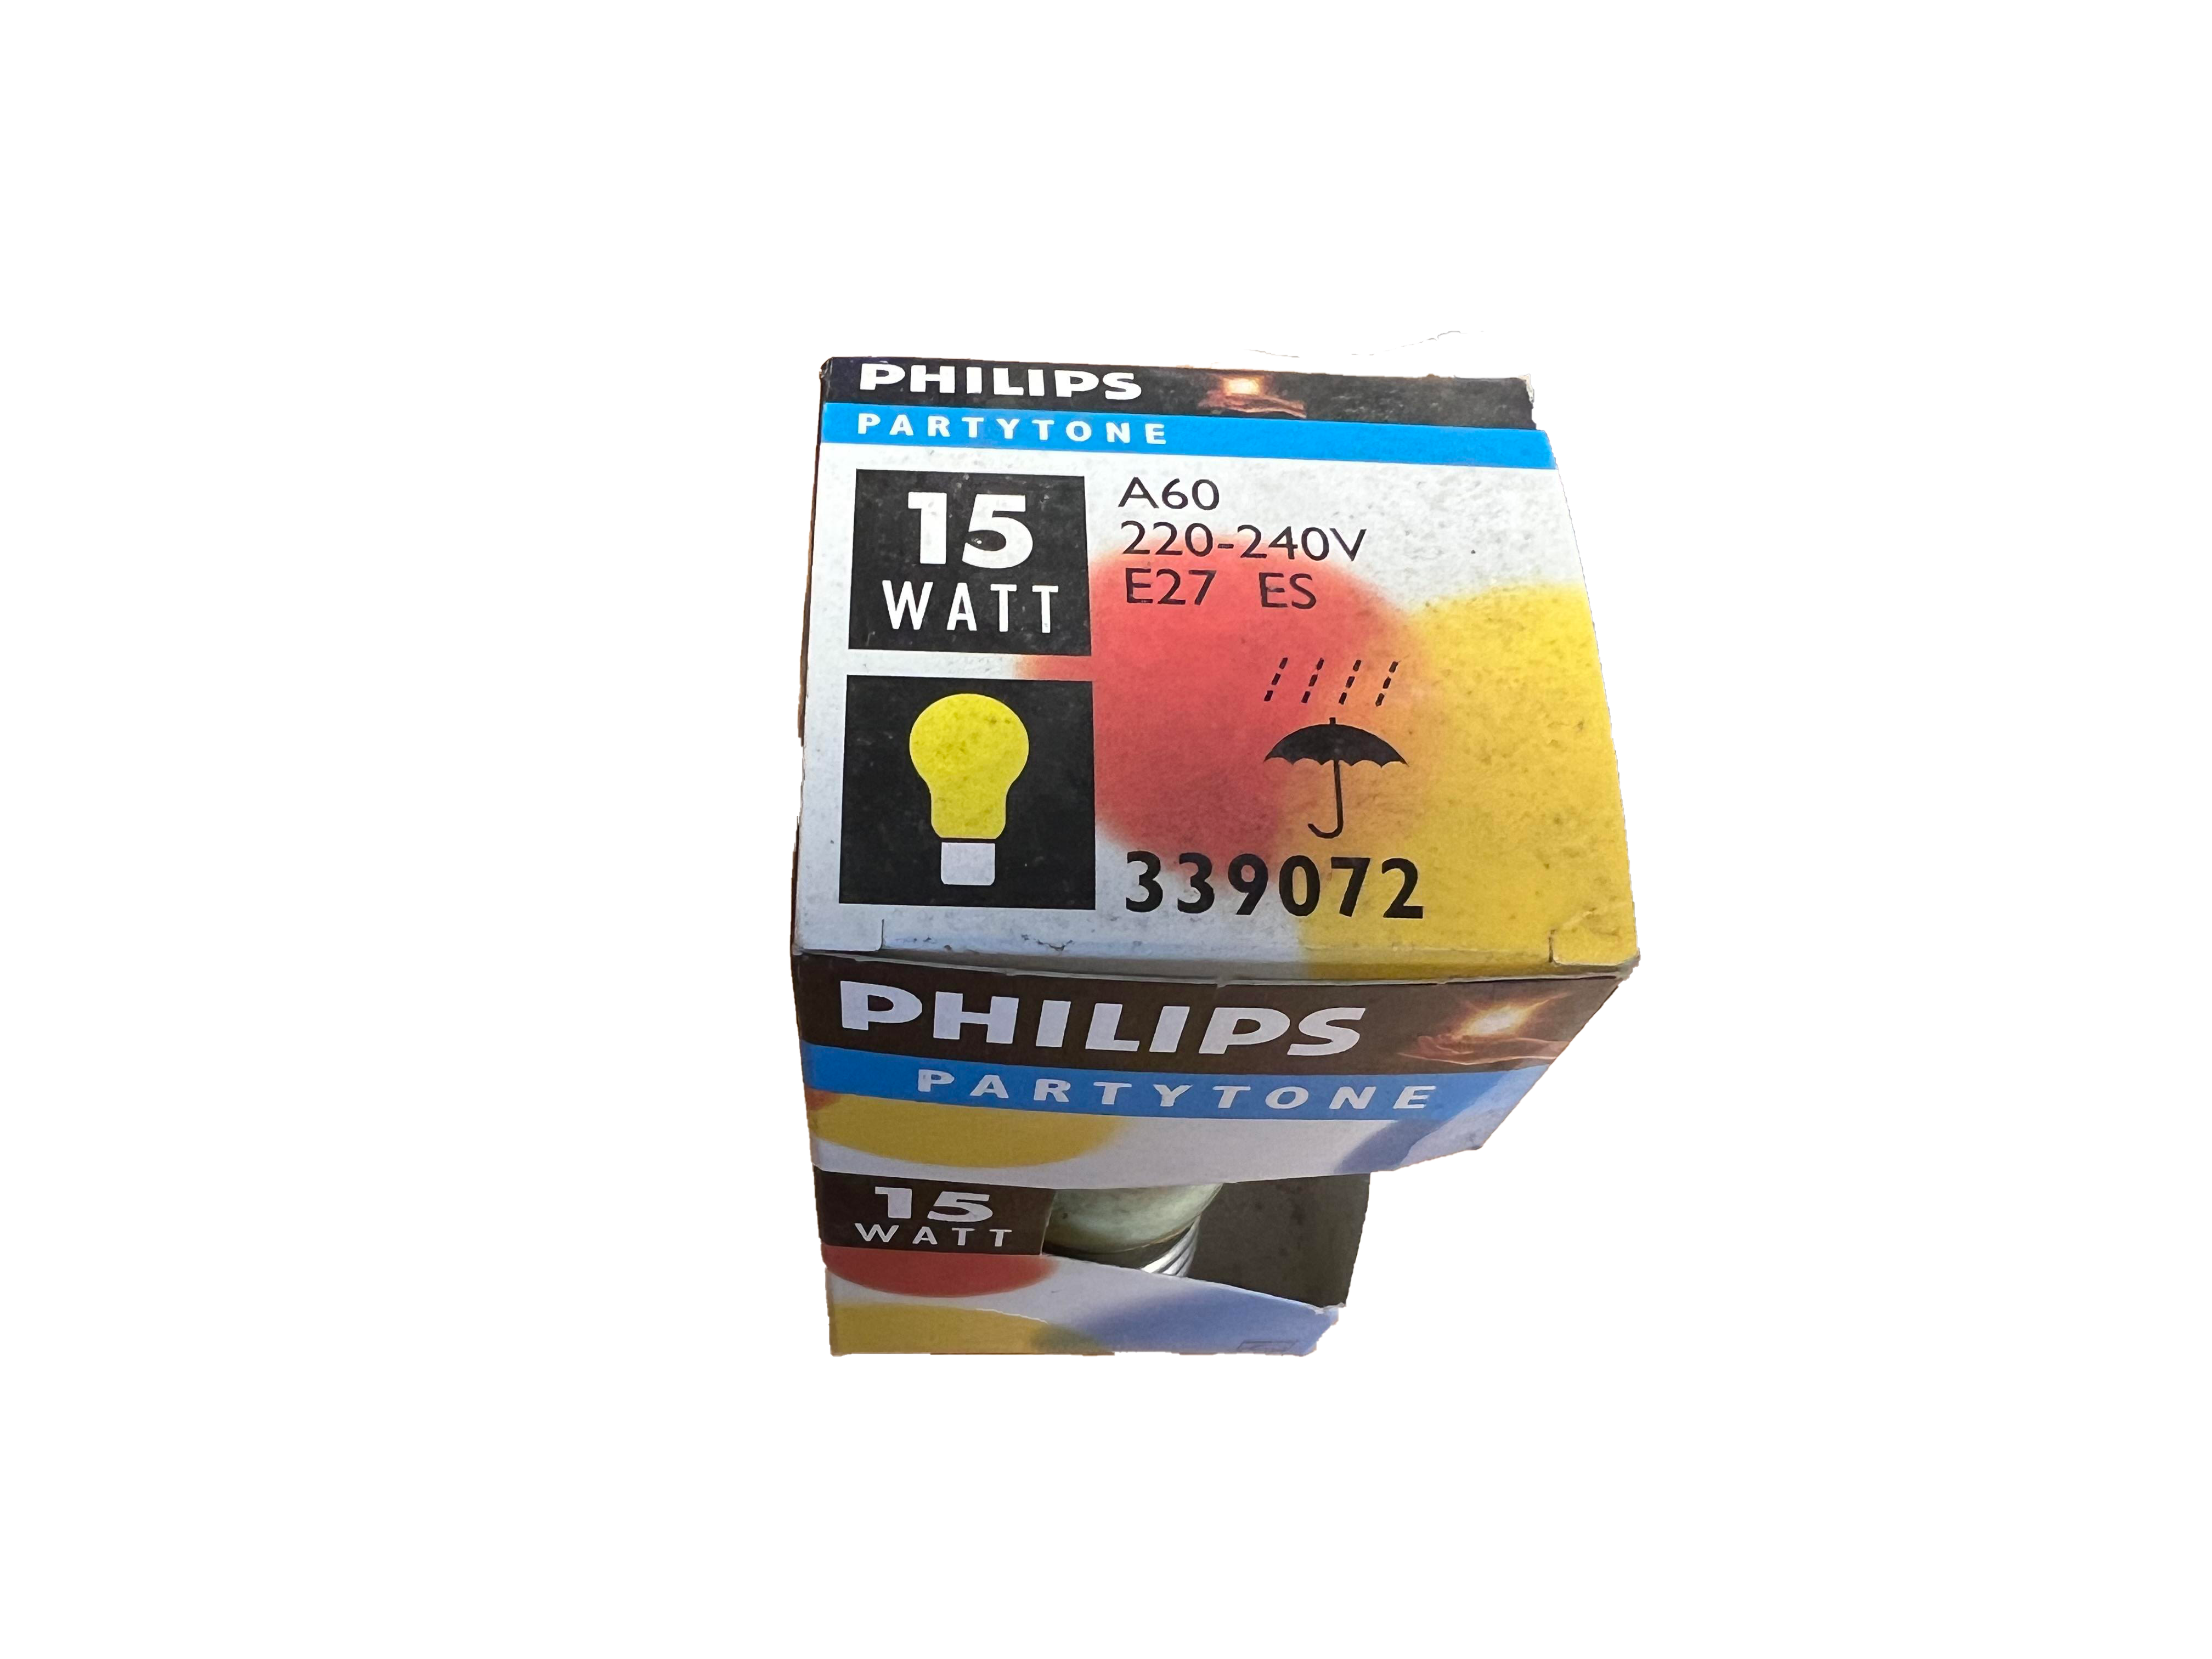 Philips Partytone A60 15W 220-240V